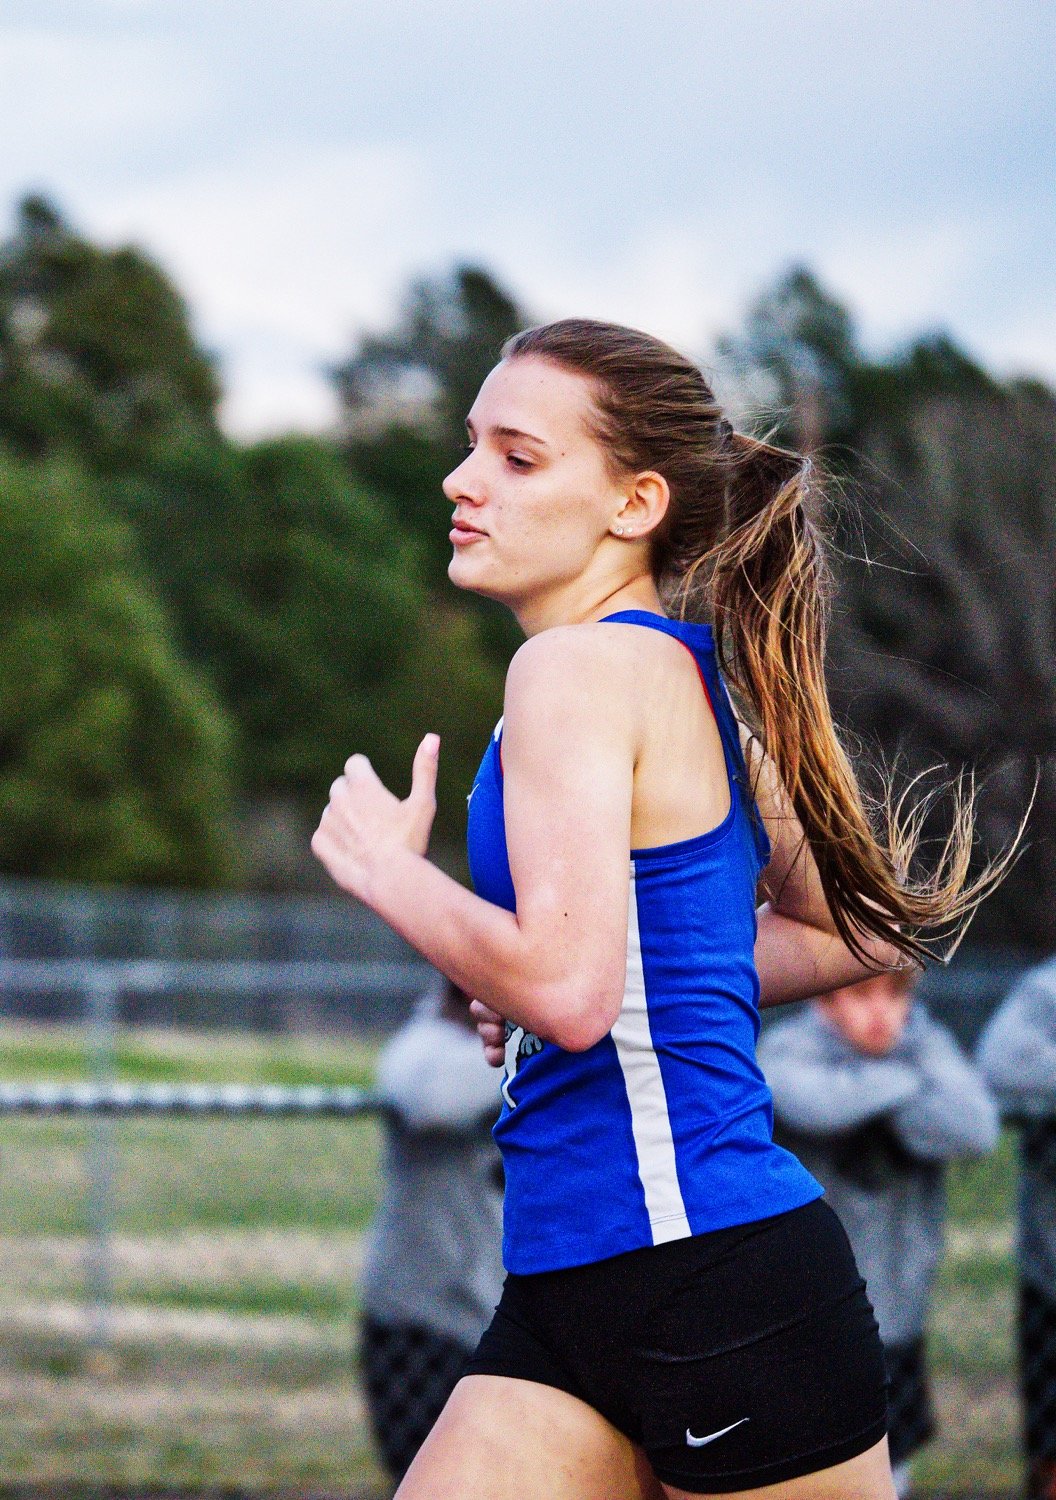 Sarah Smith runs the 800 meters for Quitman. [see more shots, put them on your wall]